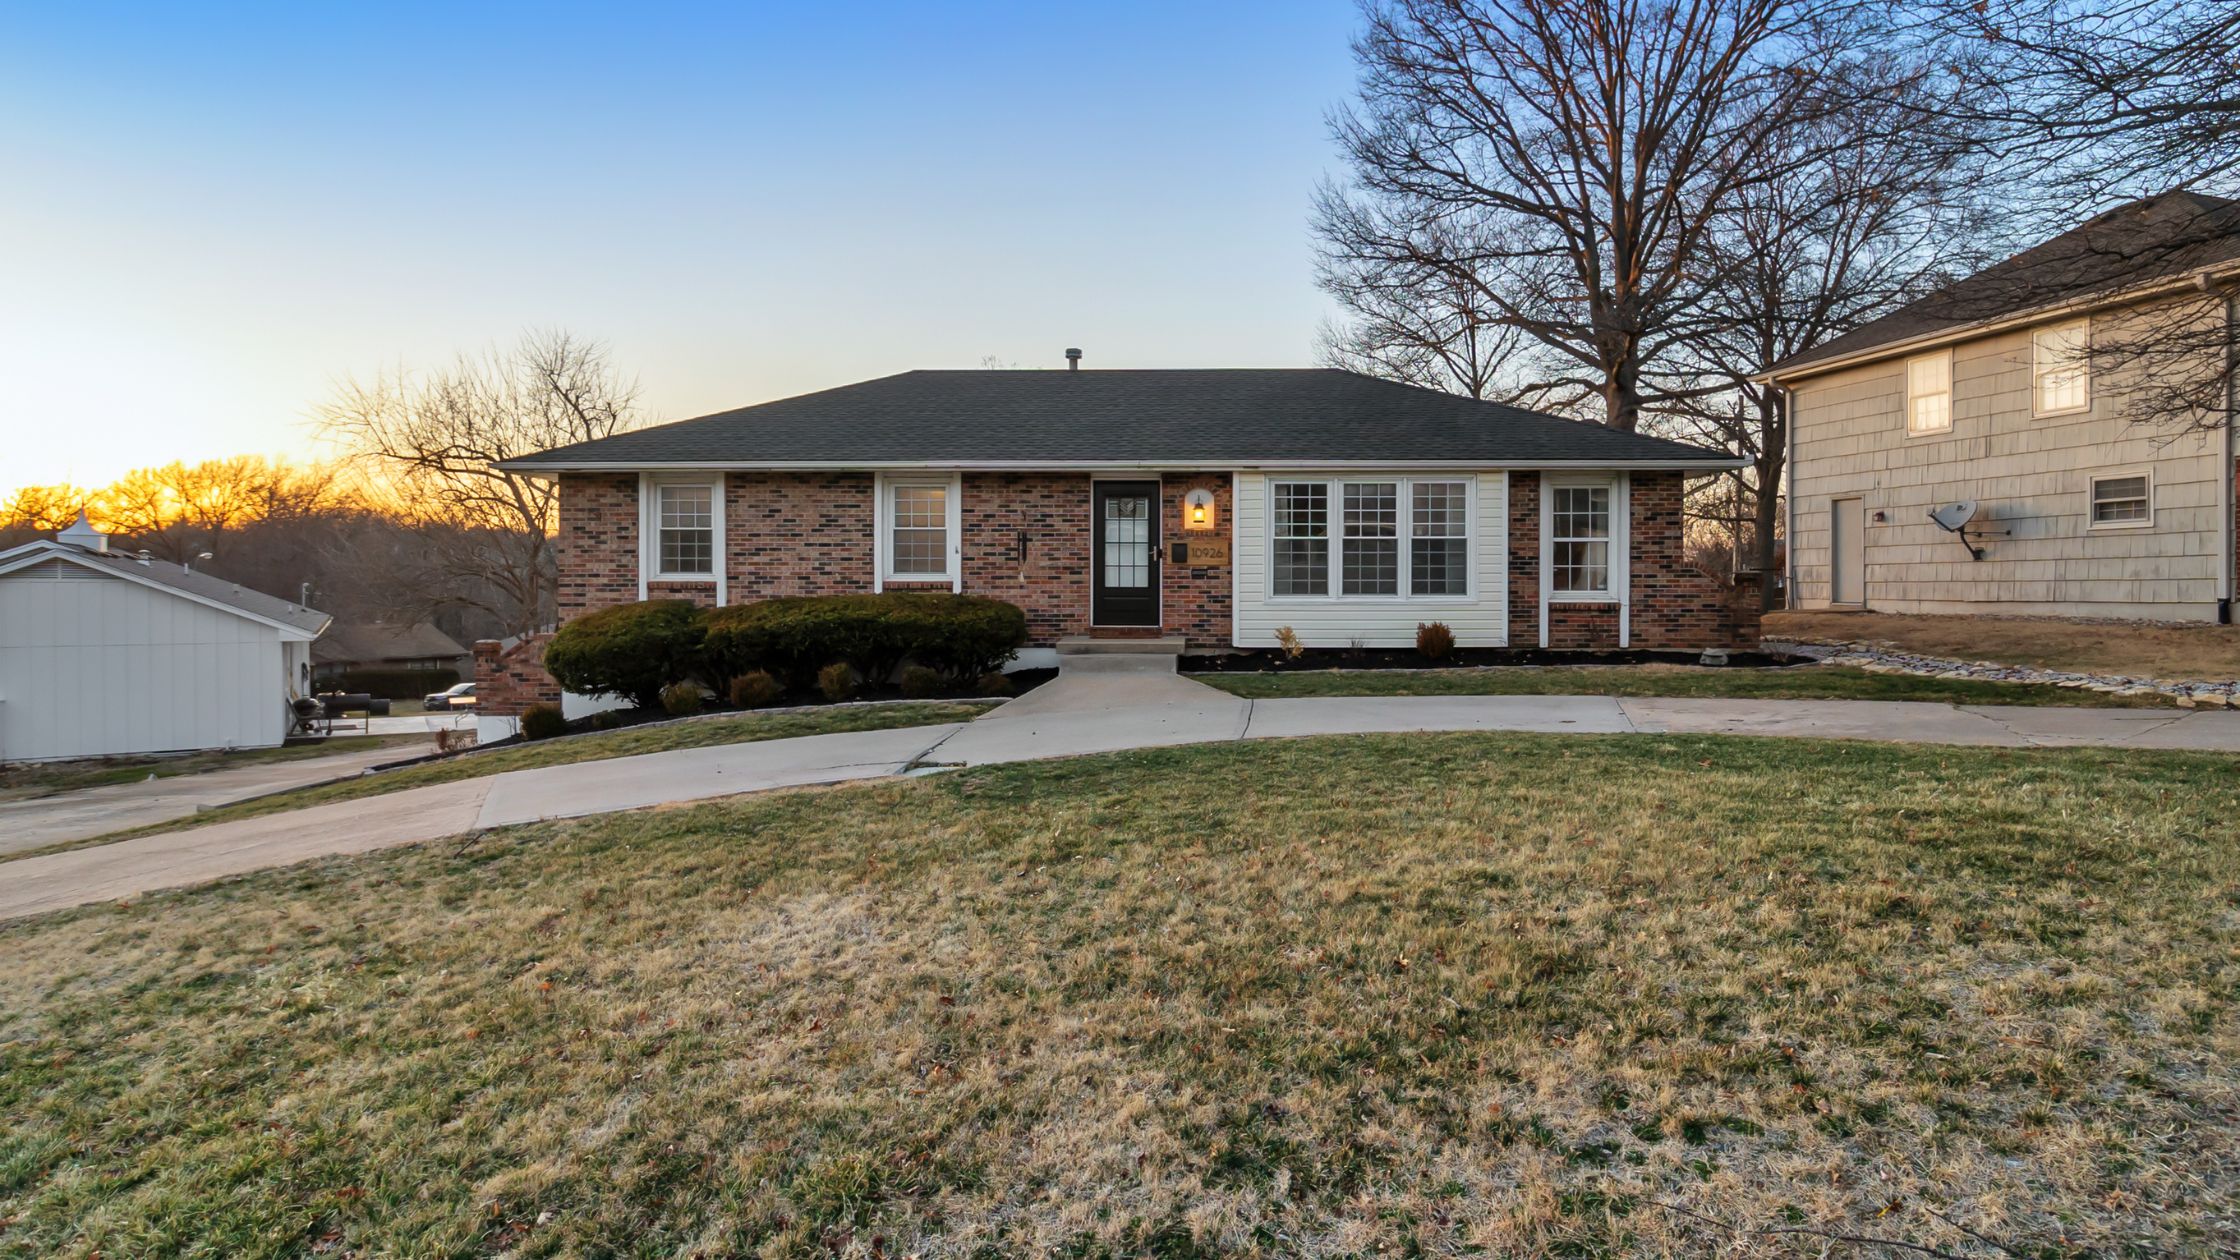 Raised ranch brick home with circle drive on large lot.